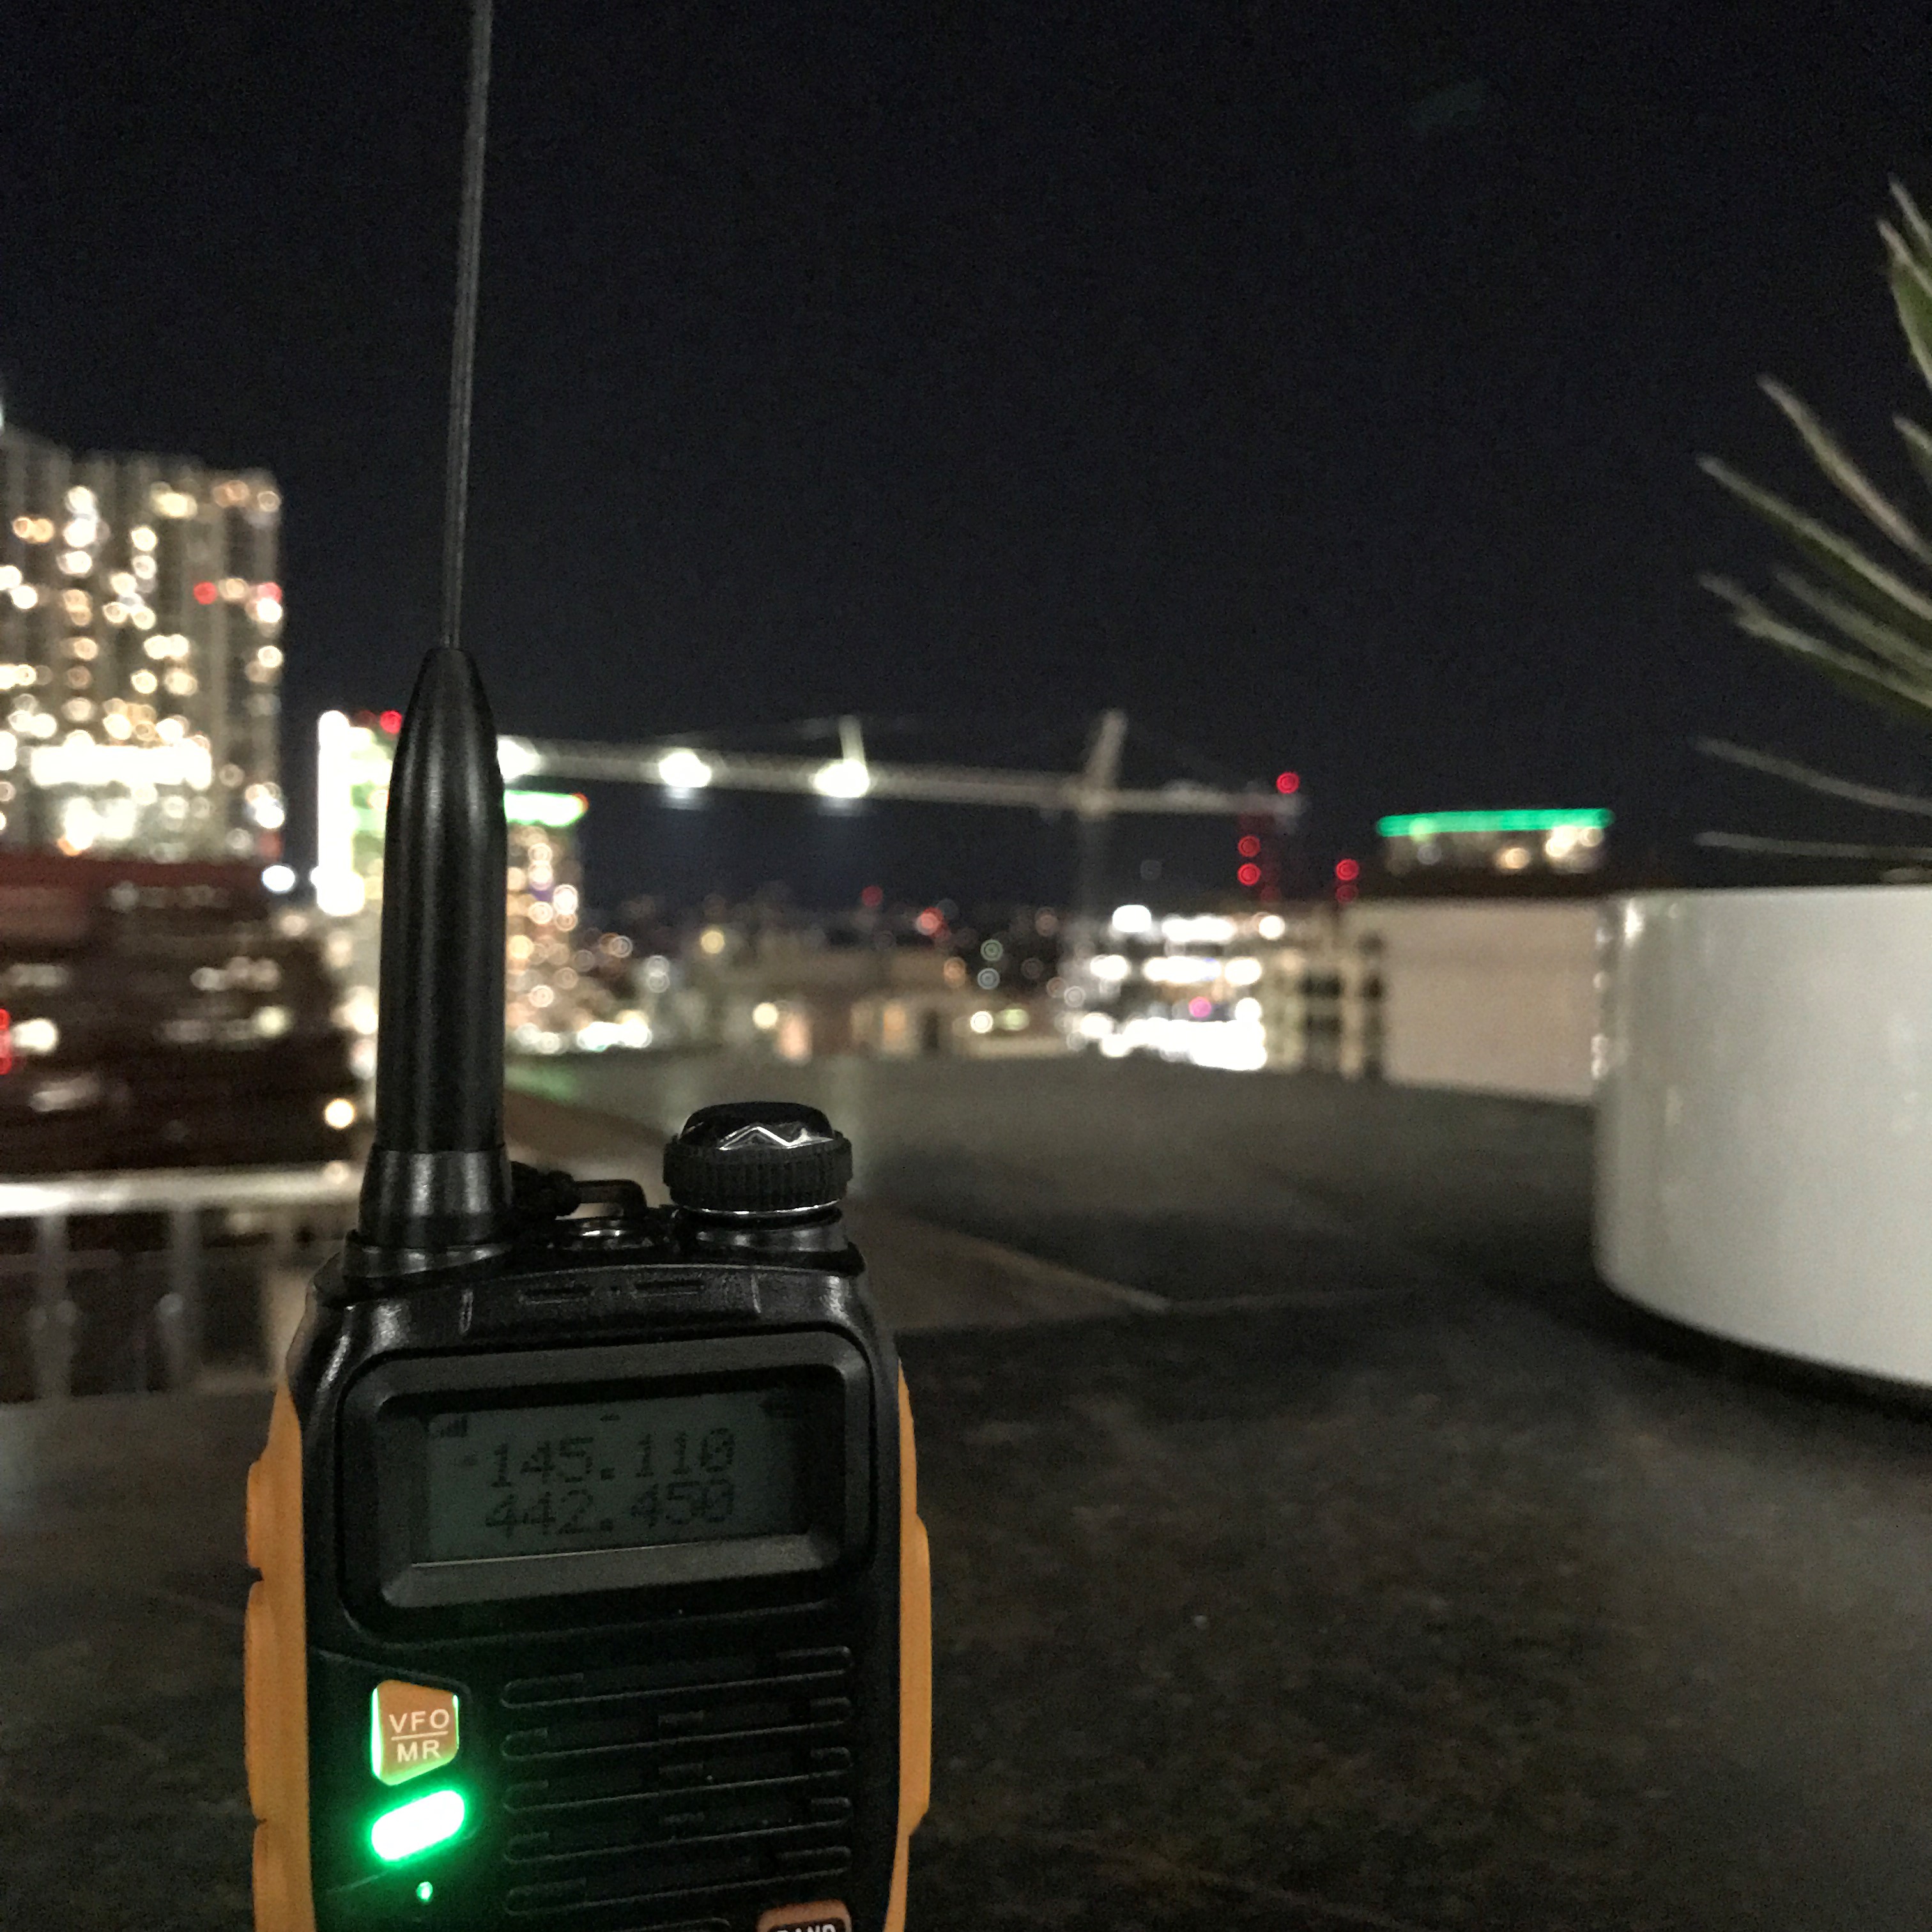 handheld radio with towers in background